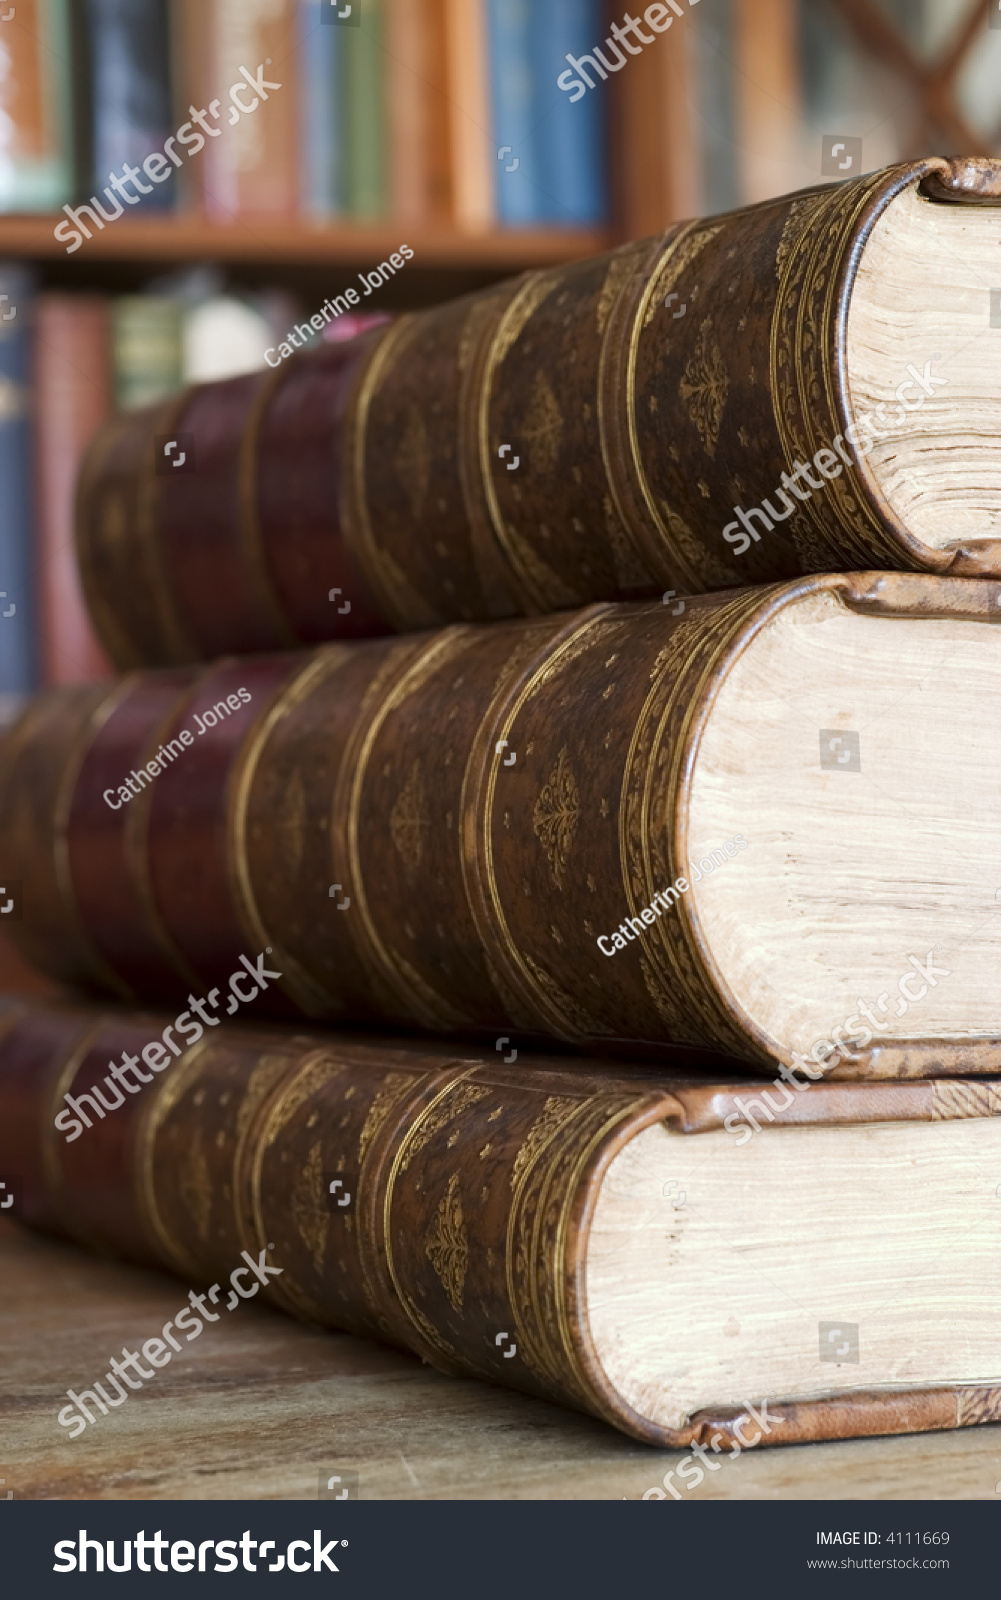 Three old books in front of library shelves #4111669